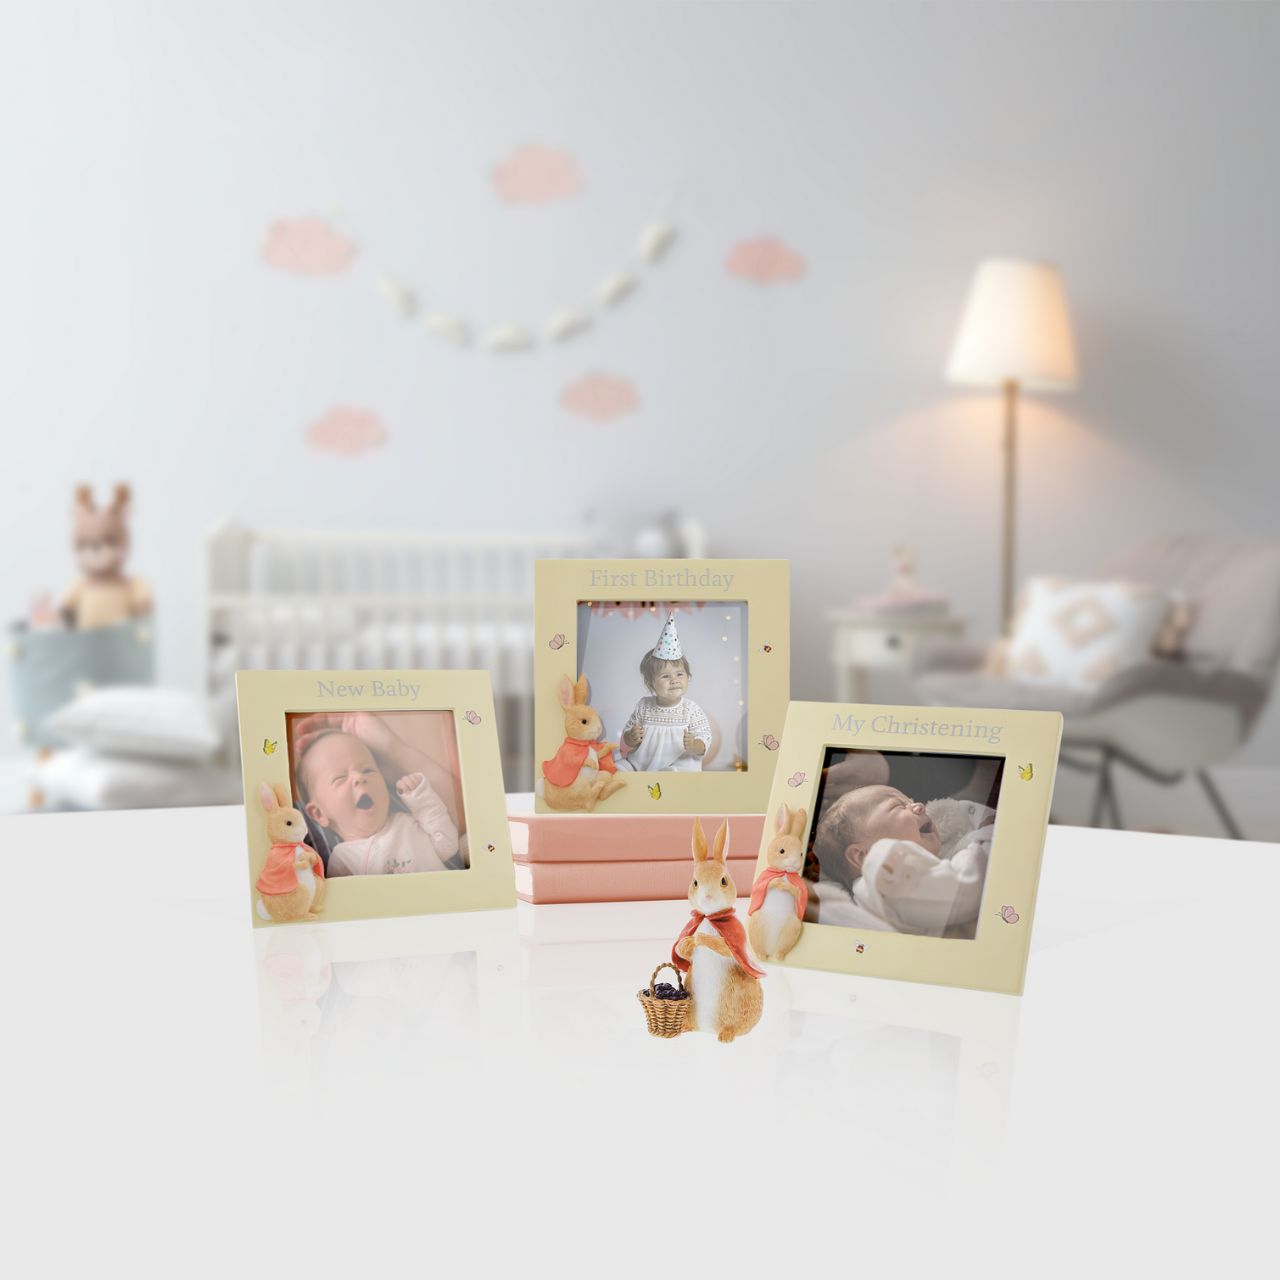 This charming Flopsy Christening photo frame is the perfect place to display a picture from your little ones Christening and is sure to earn a place of honour on a tabletop or mantel. Complete with original illustrations from the Beatrix Potter stories. Photo frame fits square sized photos.